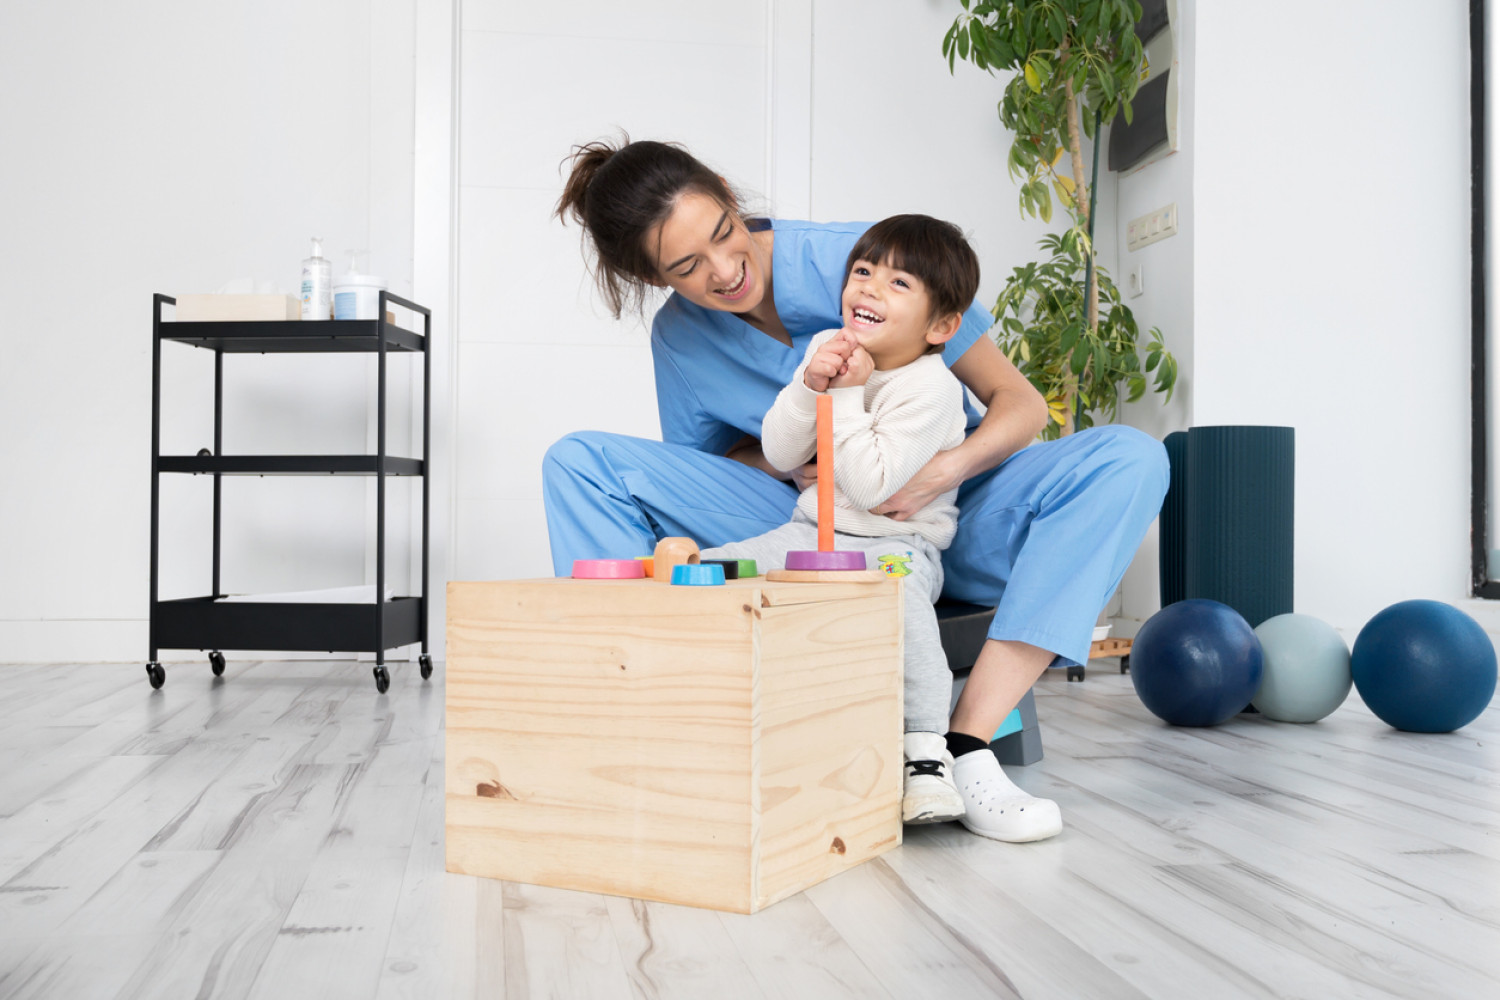 A healthcare professional in blue scrubs affectionately interacting with a young boy while they play with building blocks, symbolizing cerebral palsy support in a therapeutic setting